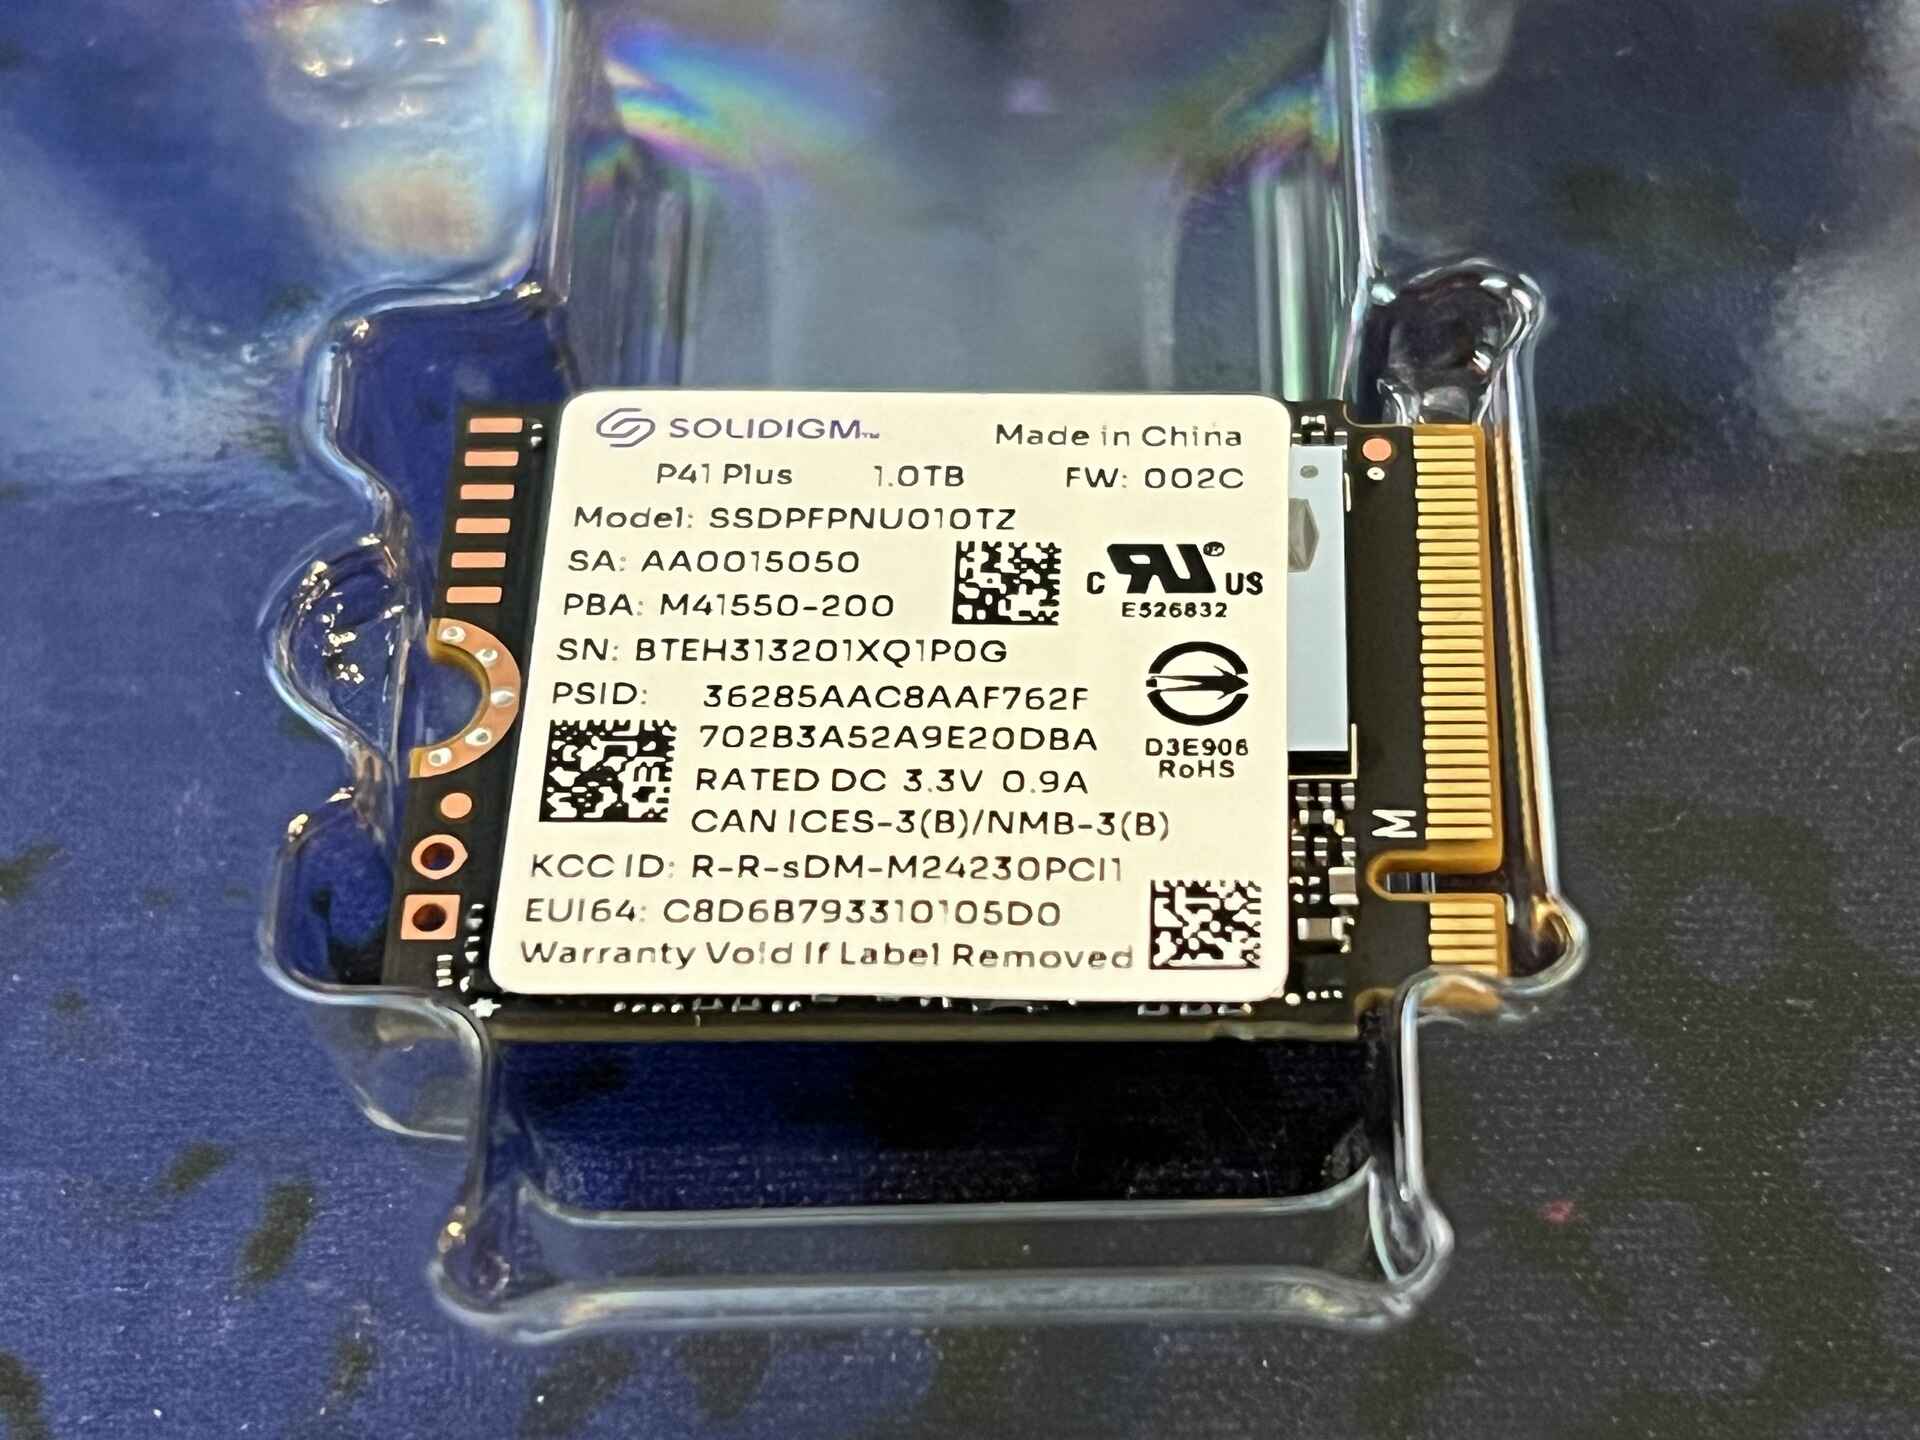 Photograph of the Solidgm P41 Plus SSD